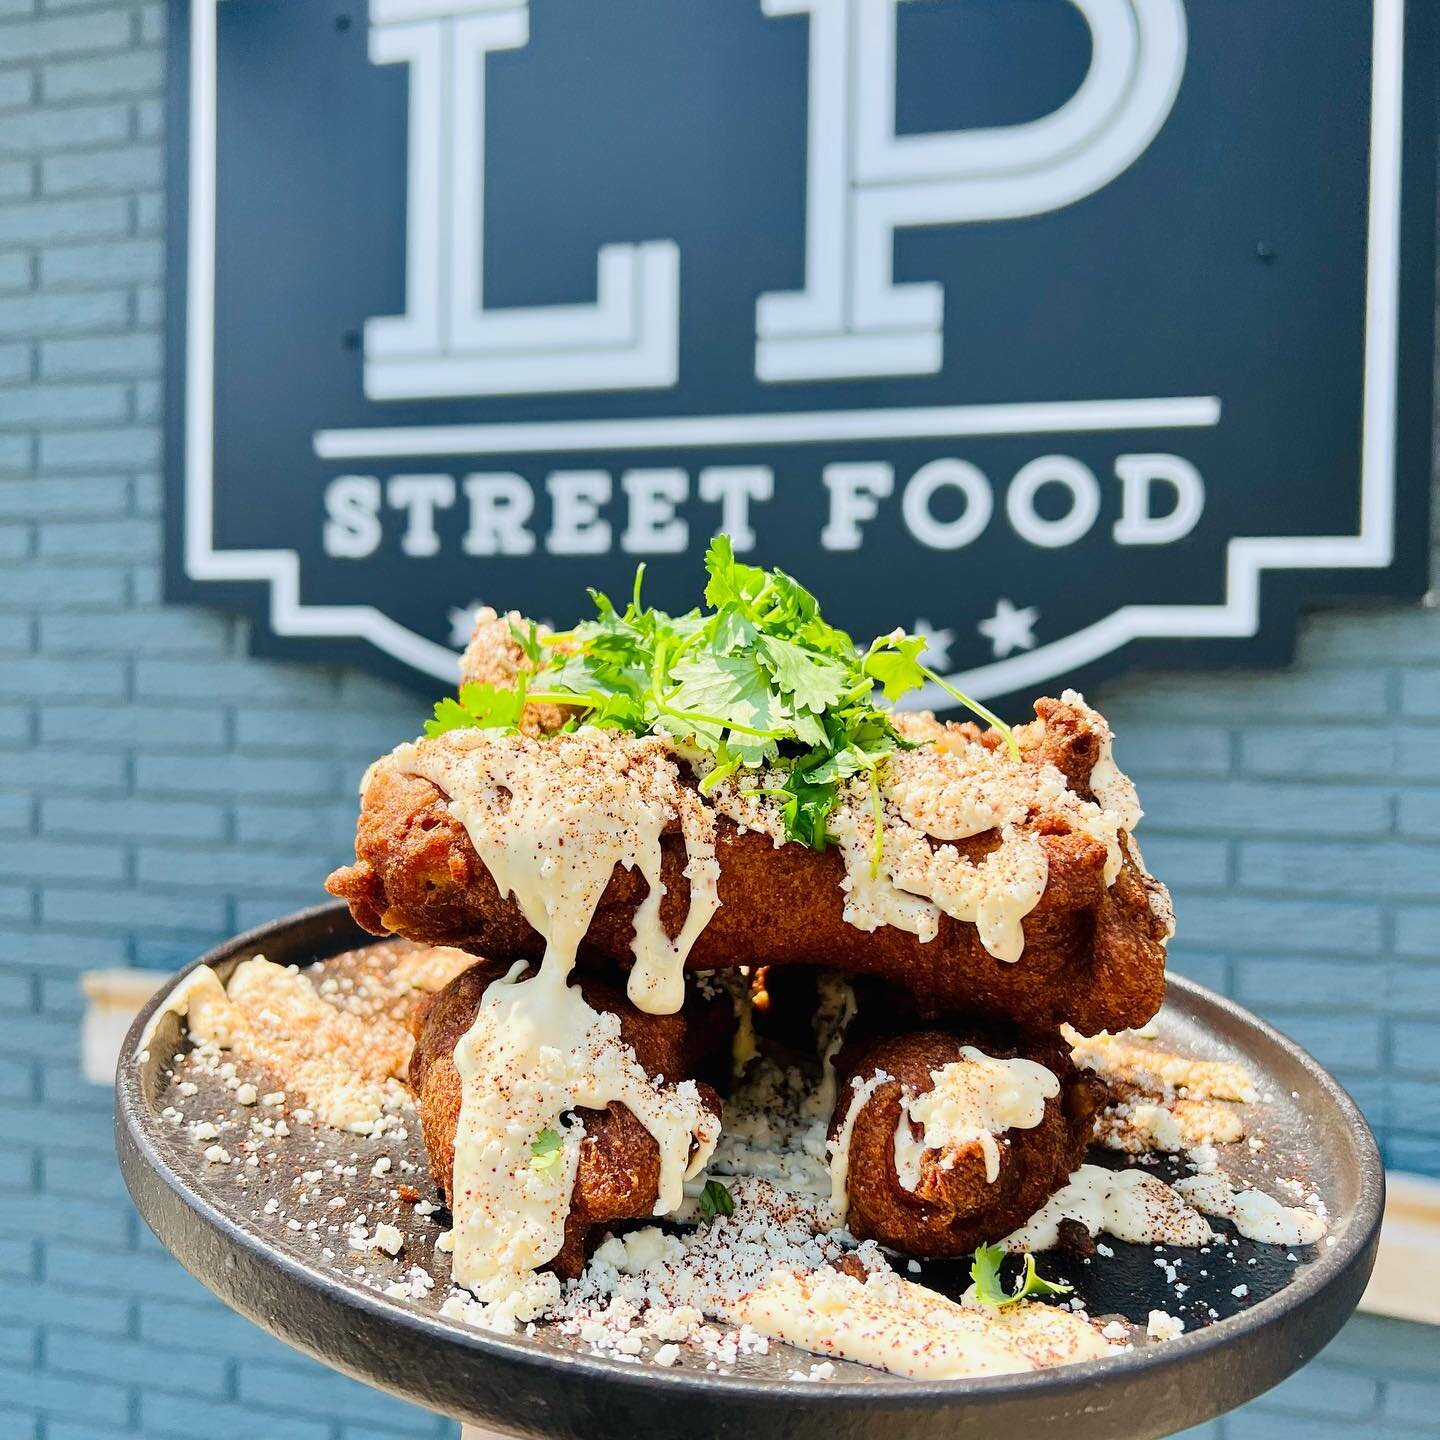 🌽🌭 ELOTE CORN DOGS 🌭🌽
We&rsquo;re winning with this weekend special at LPSF 🤩

Corn Fried Corn Dog | Tajin Lime Aioli | Cotija | Chili Powder | Cilantro 
Served stacked like Lincoln logs! 

#lpsf #weekendspecial #welovefood #funnotfancy #elote #